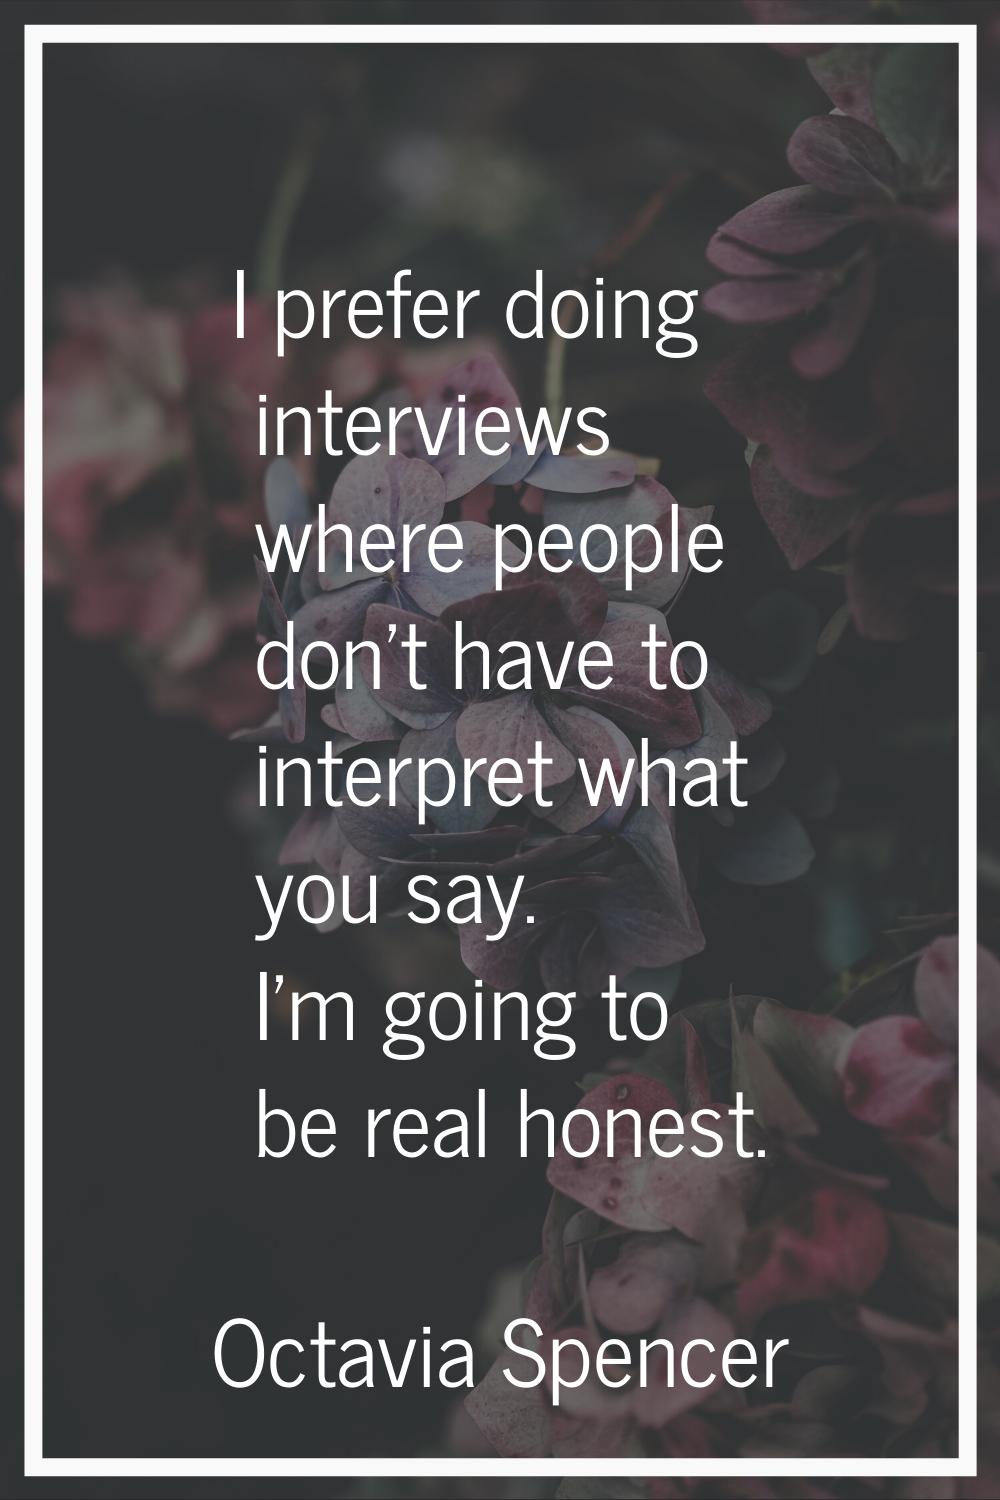 I prefer doing interviews where people don't have to interpret what you say. I'm going to be real h